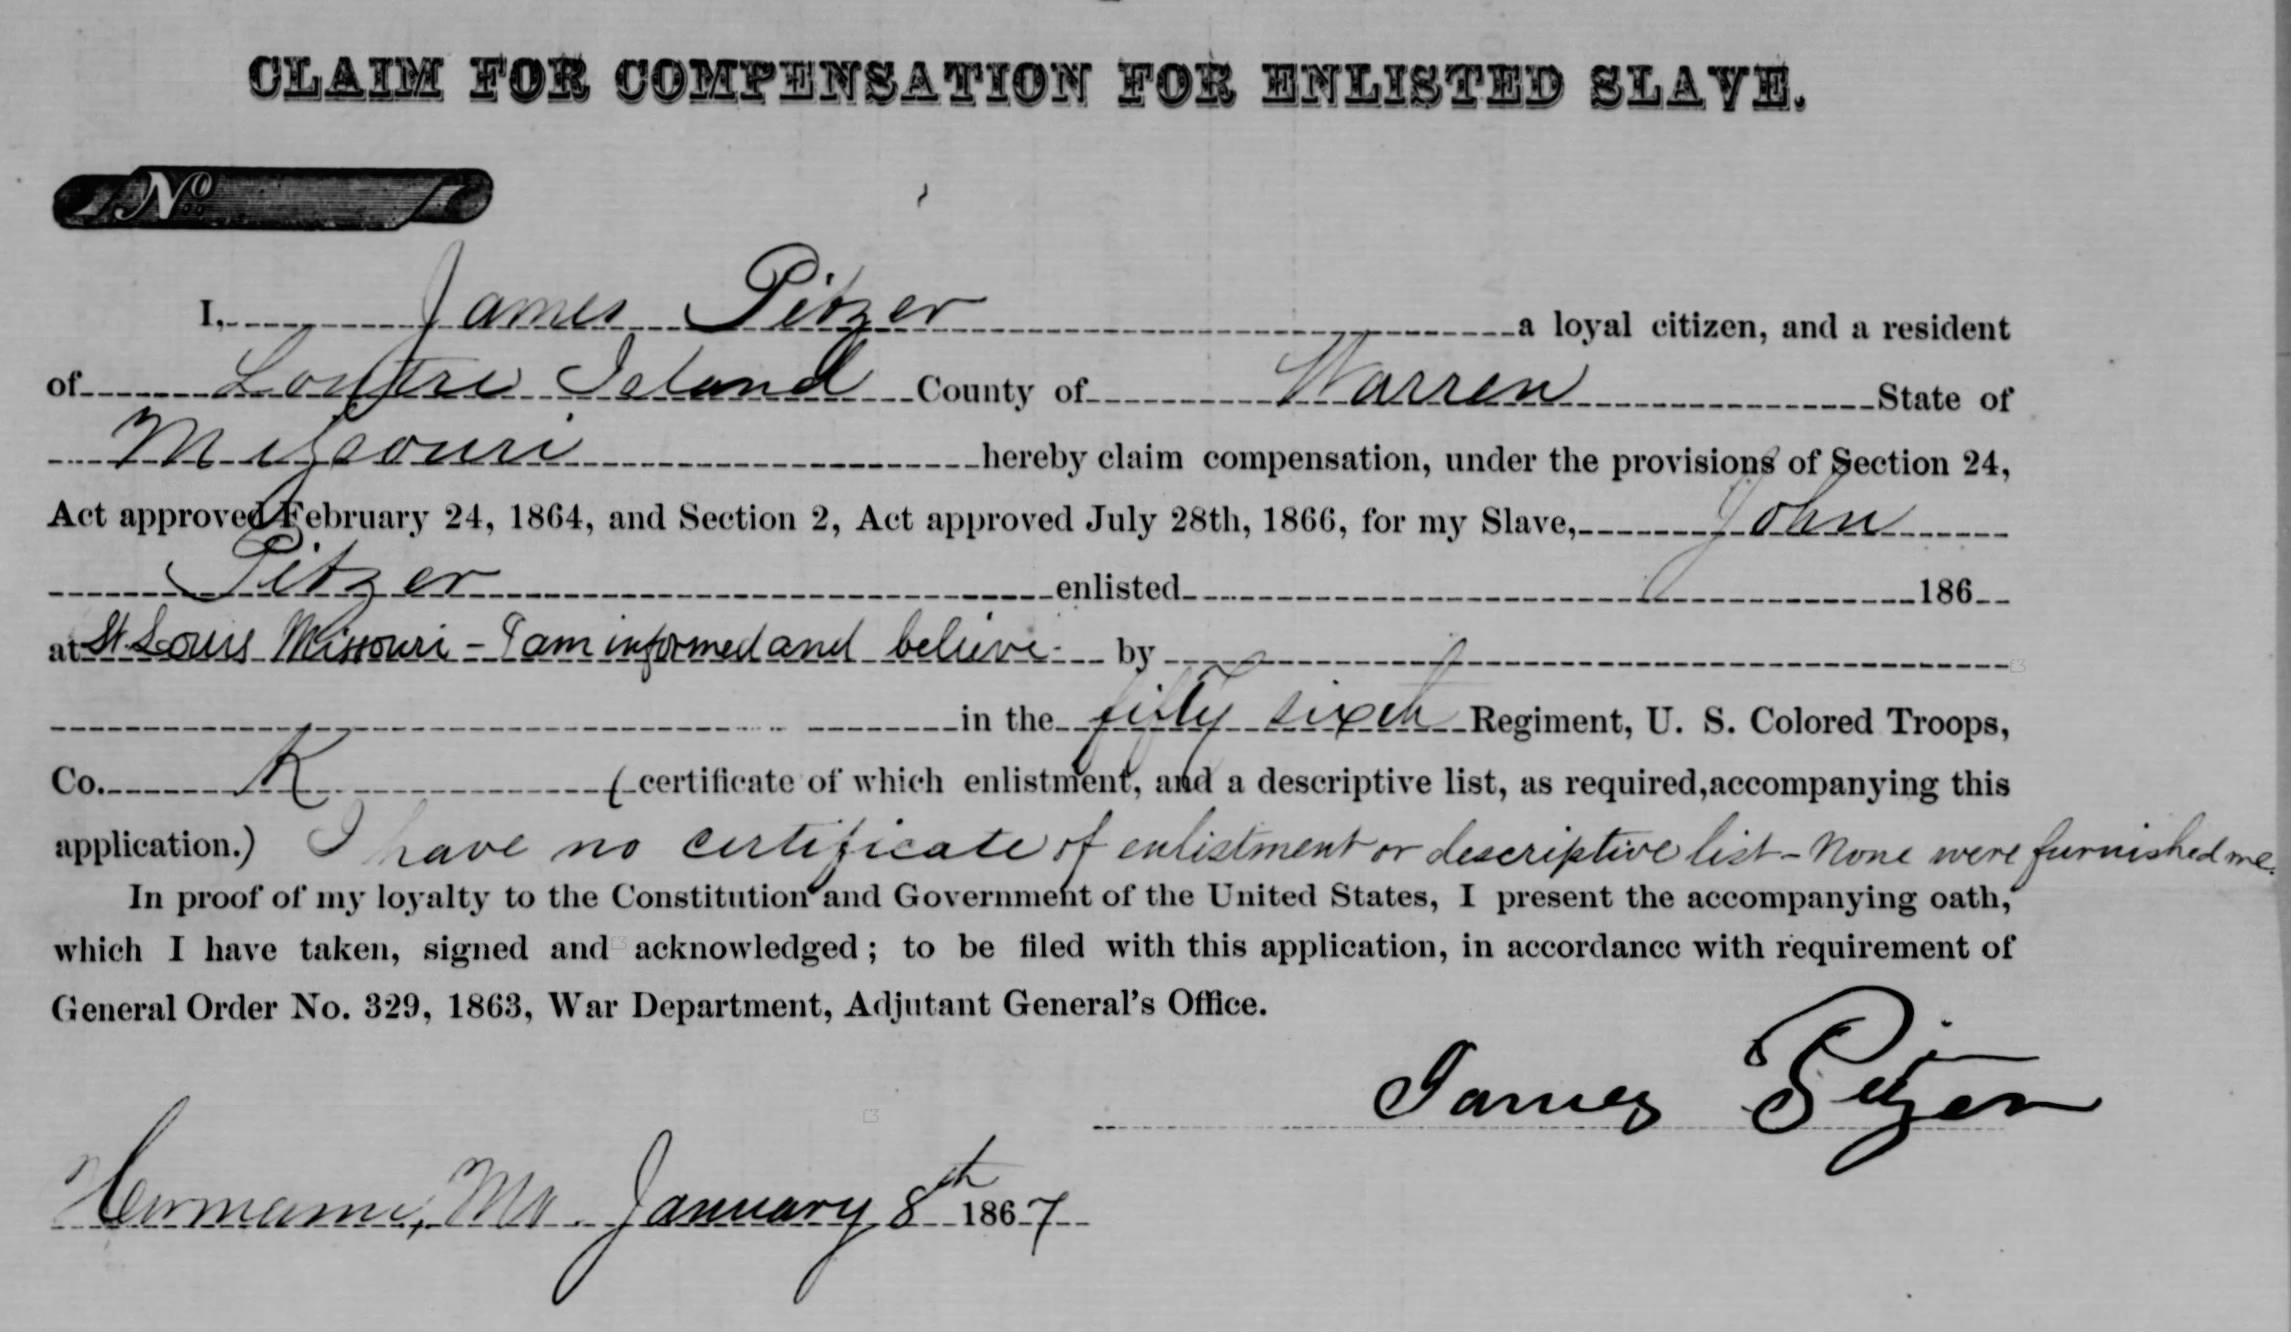 James Pitzer filing for financial compensation for John Pitzer’s service to the United States.